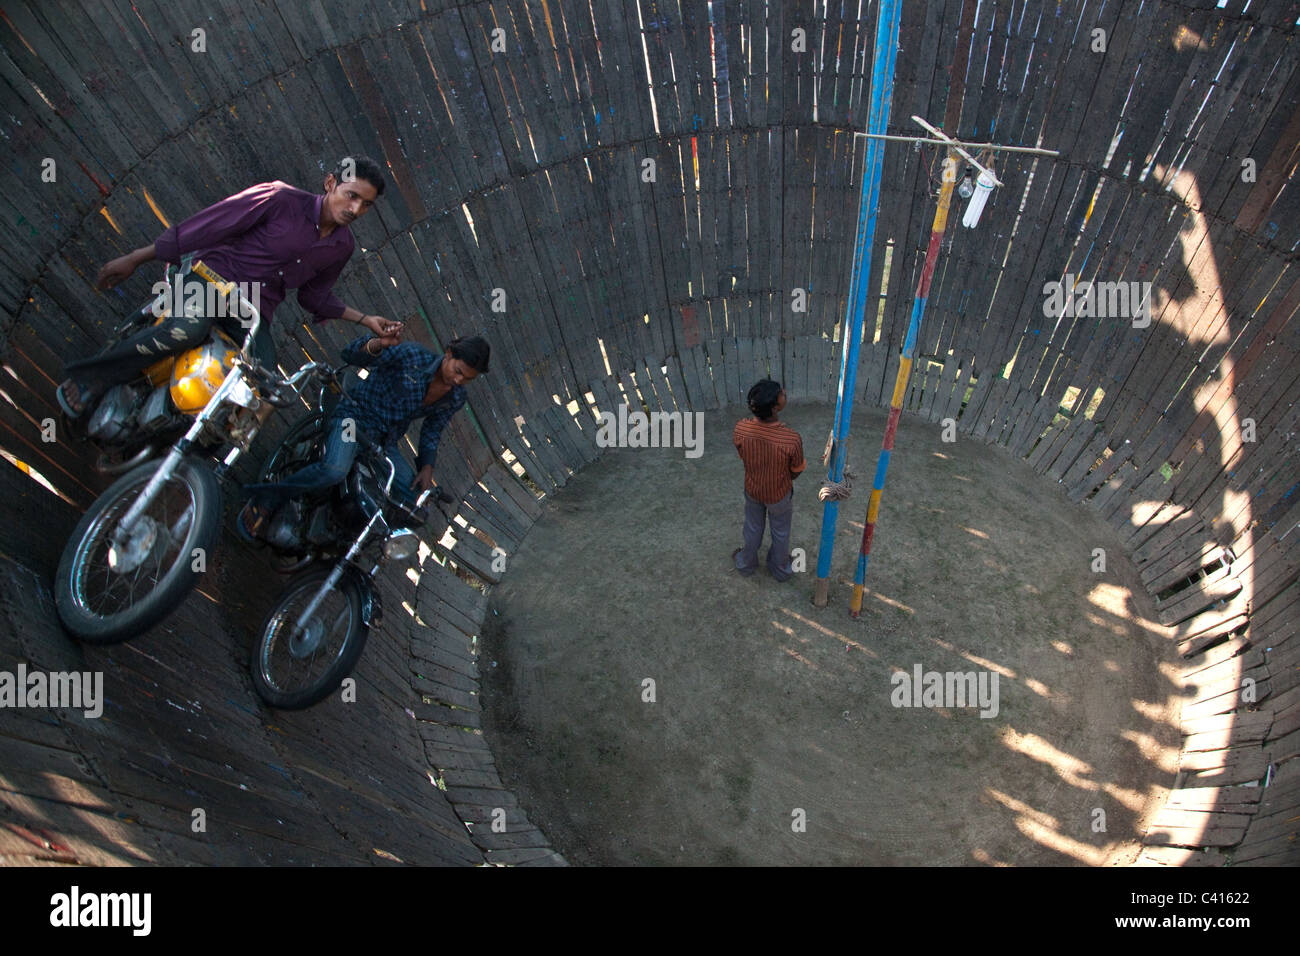 Motorcyclist perform inside the Well of Death at Sonepur Mela in Sonepur near Patna and Hajipur in Bihar state, India. Stock Photo